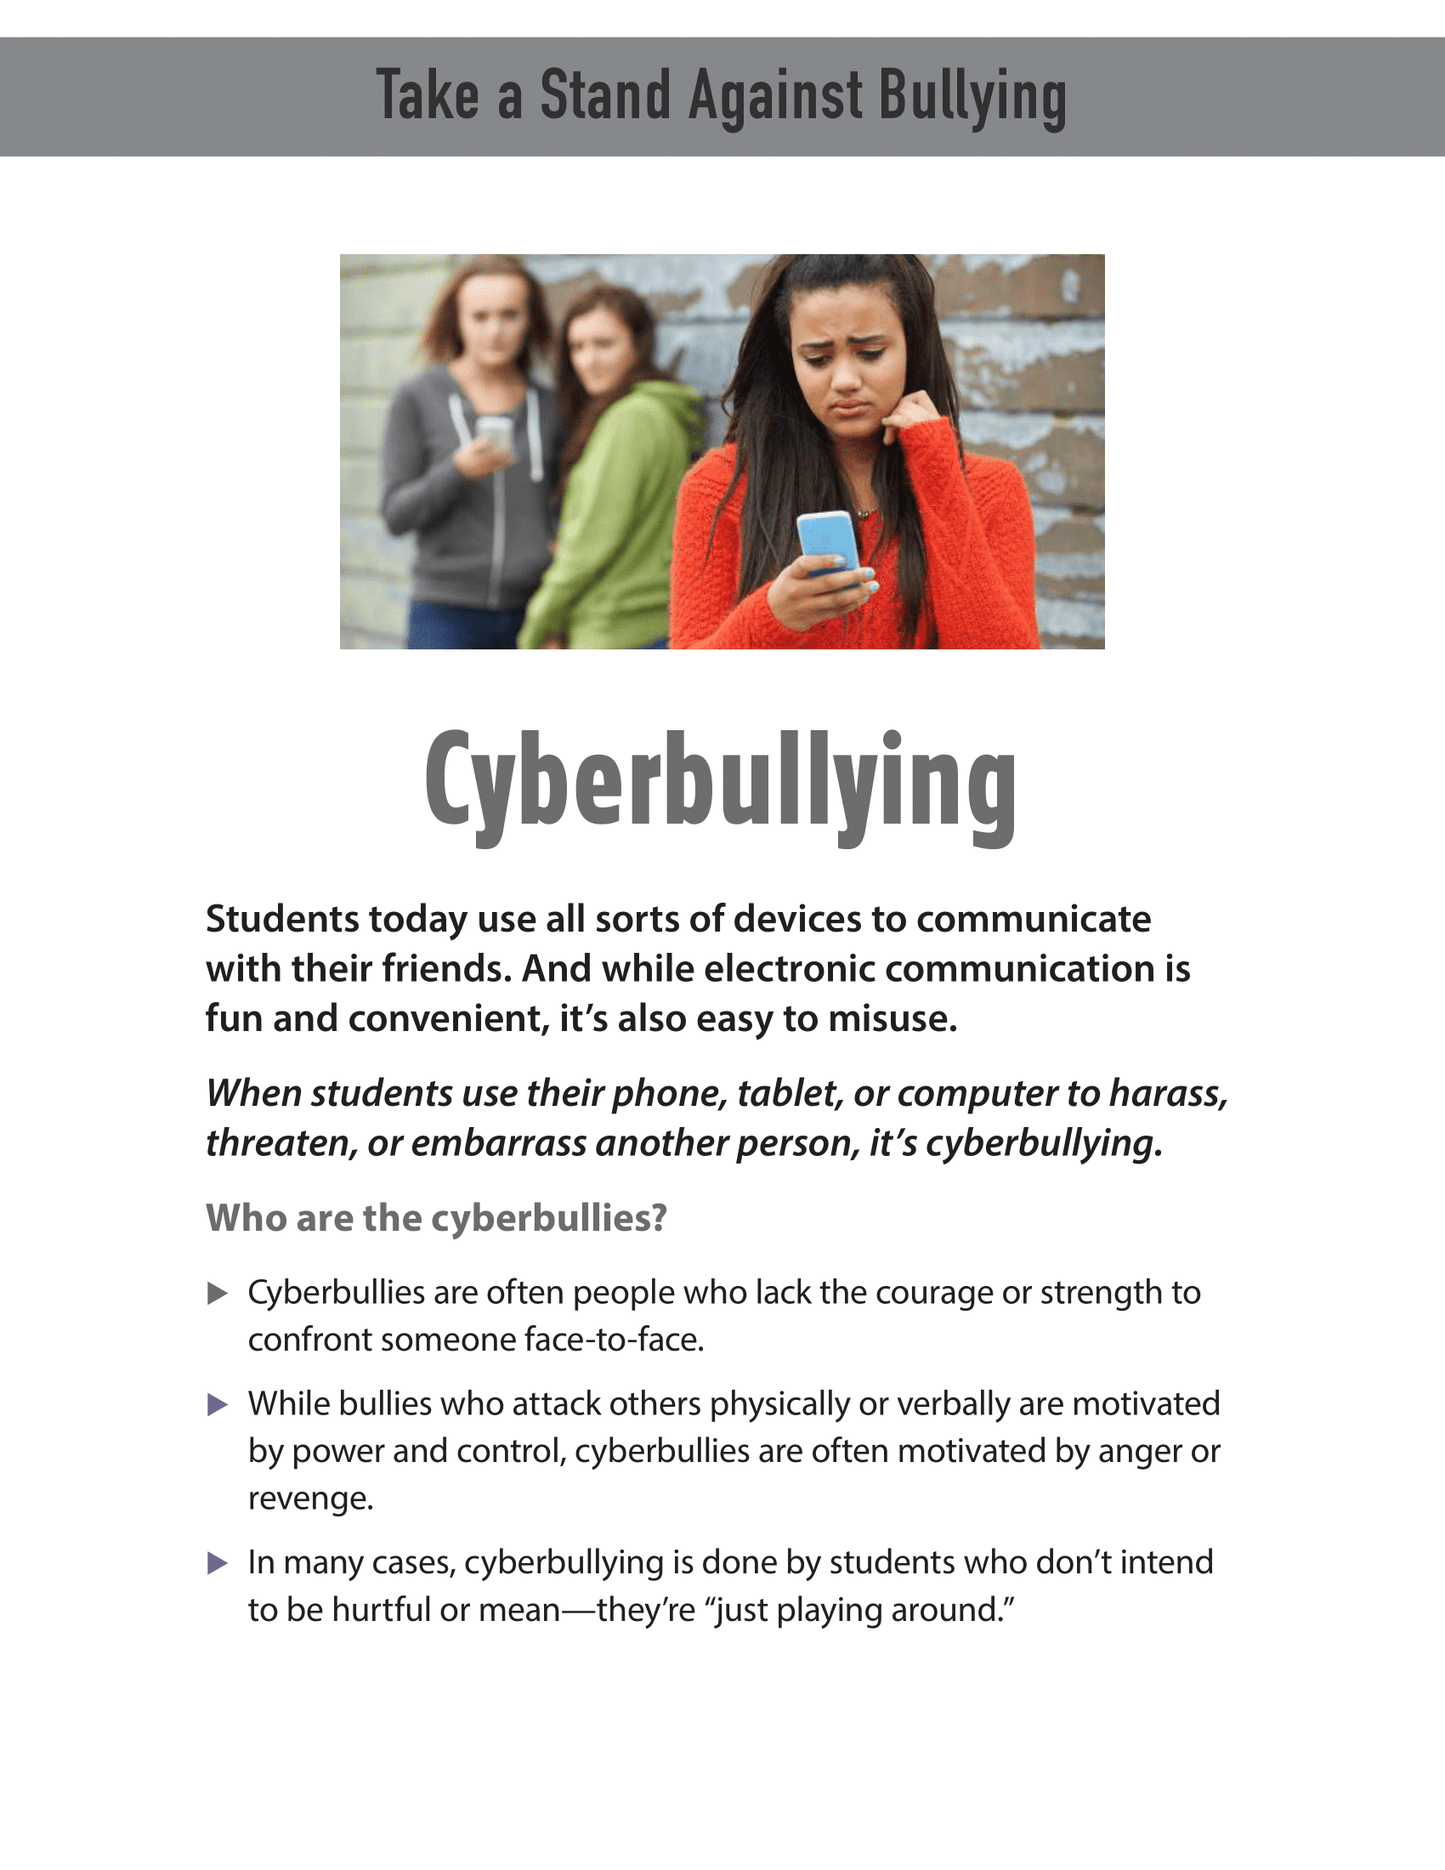 Take a Stand Against Bullying - Cyberbullying